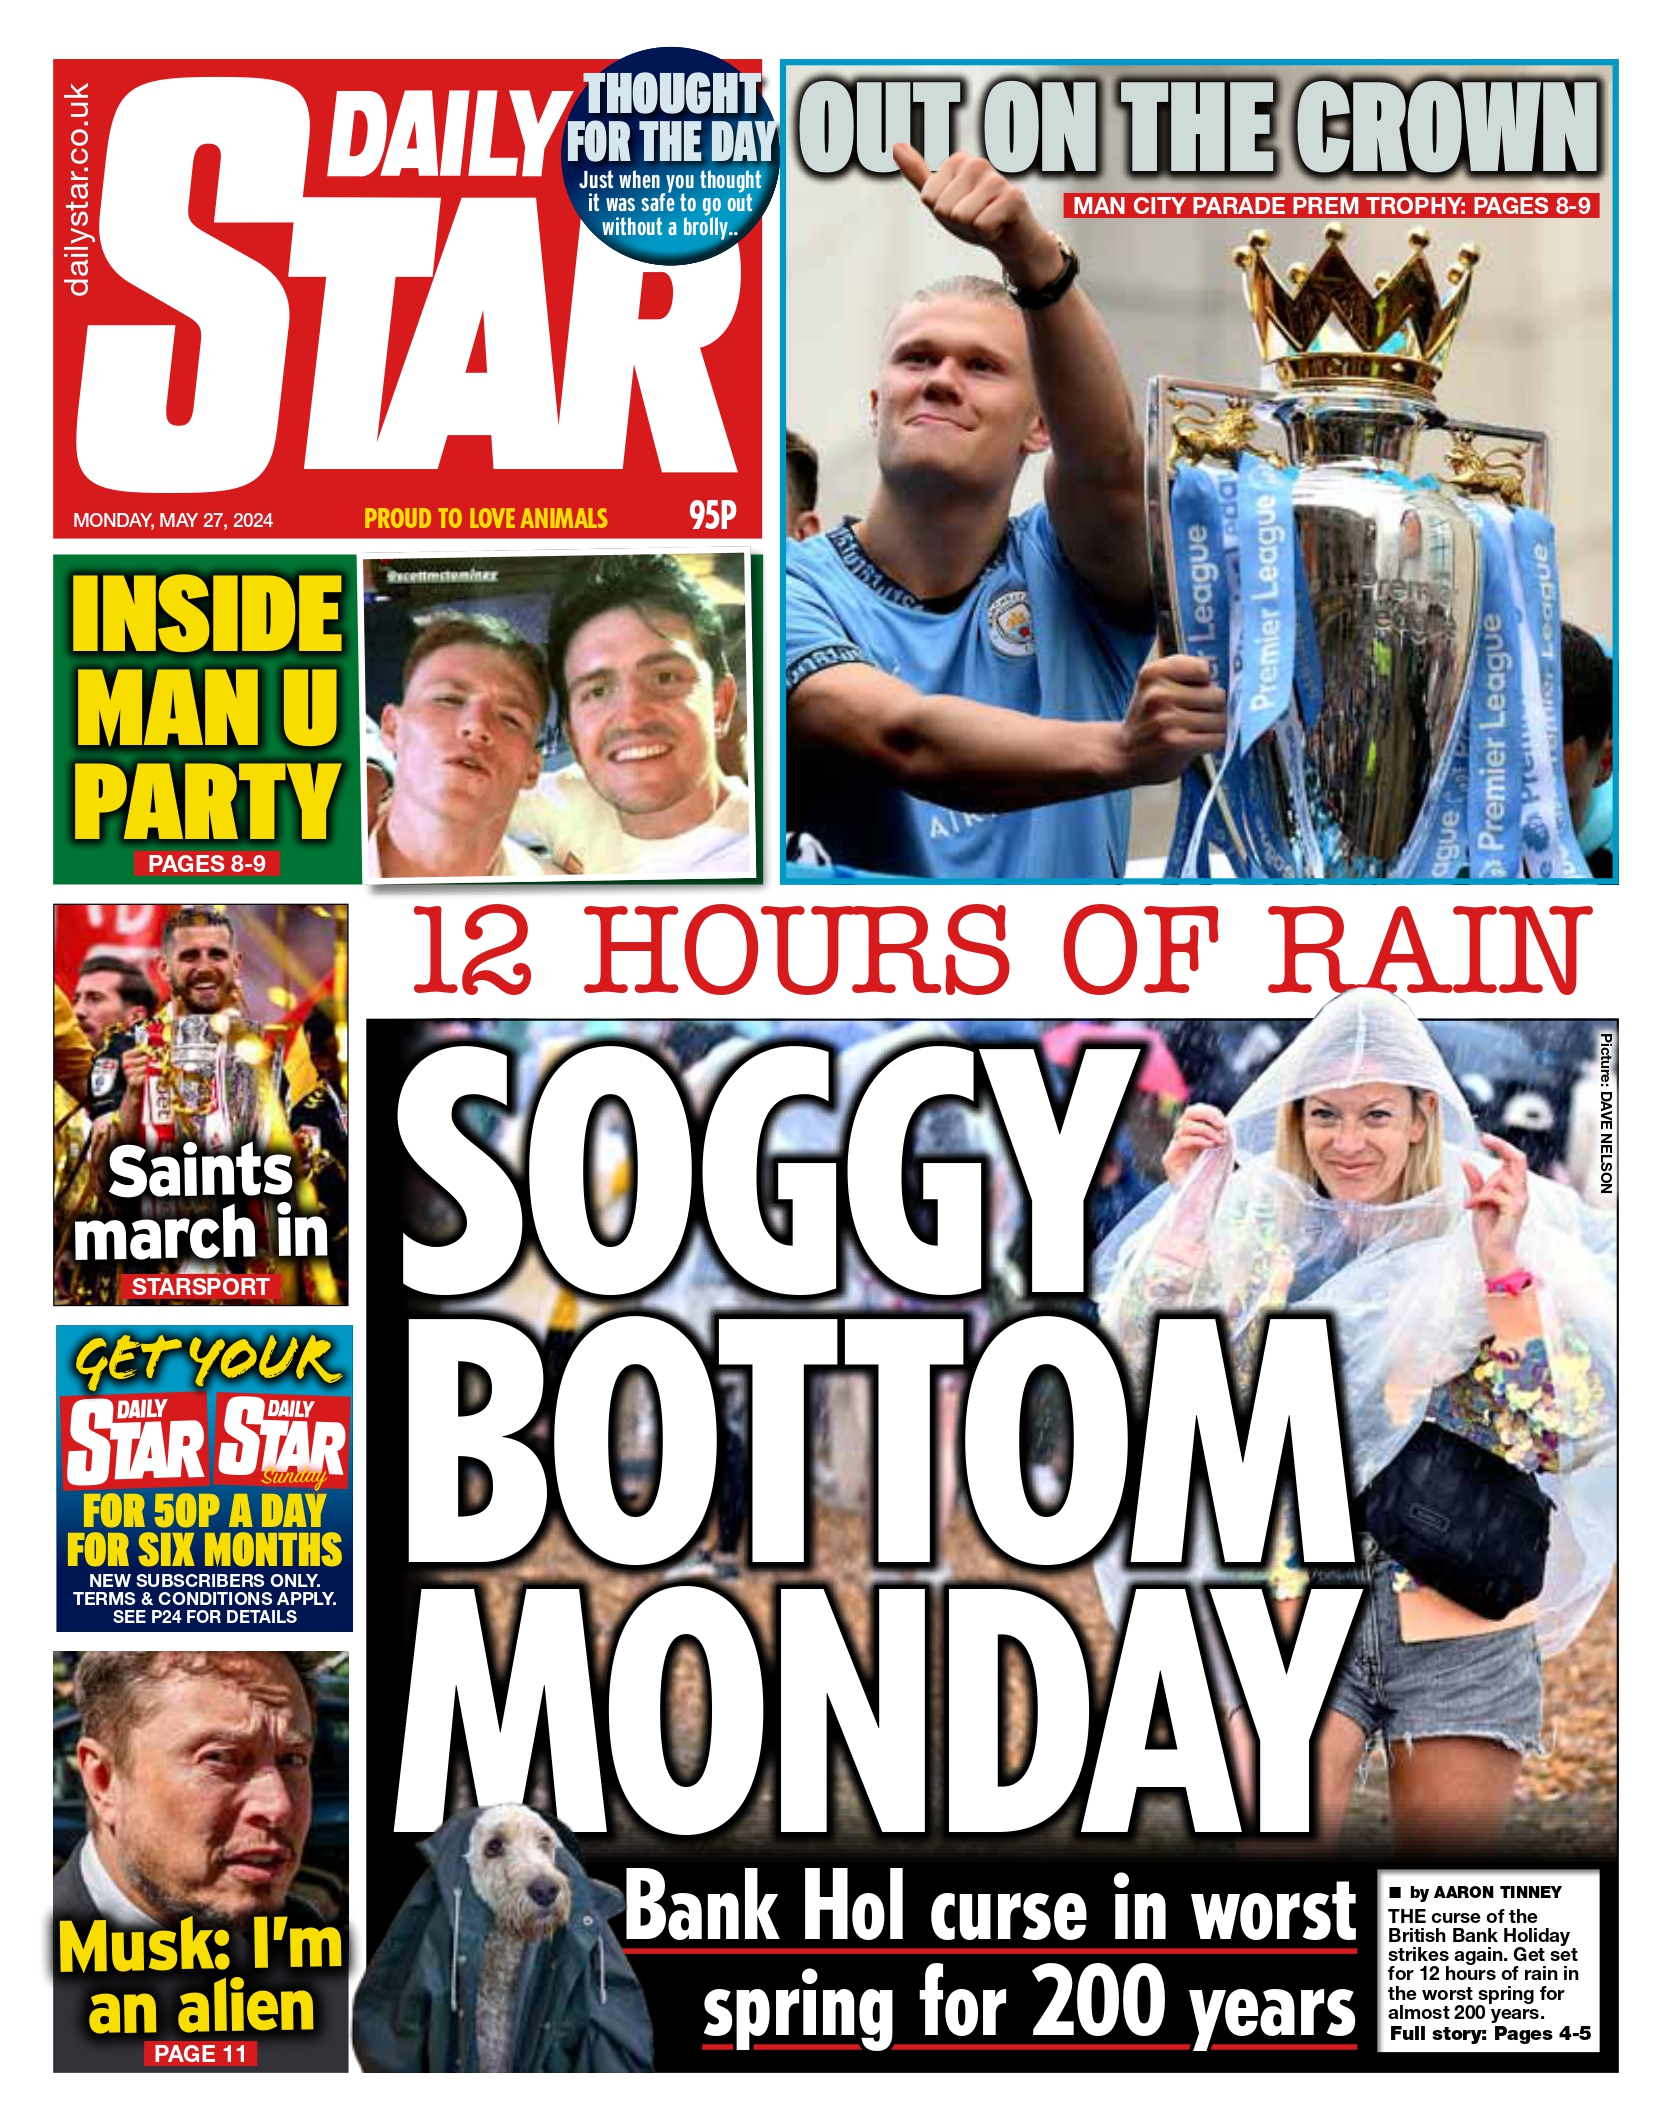 Monday's front page: Soggy bottom Monday 

#TomorrowsPapersToday